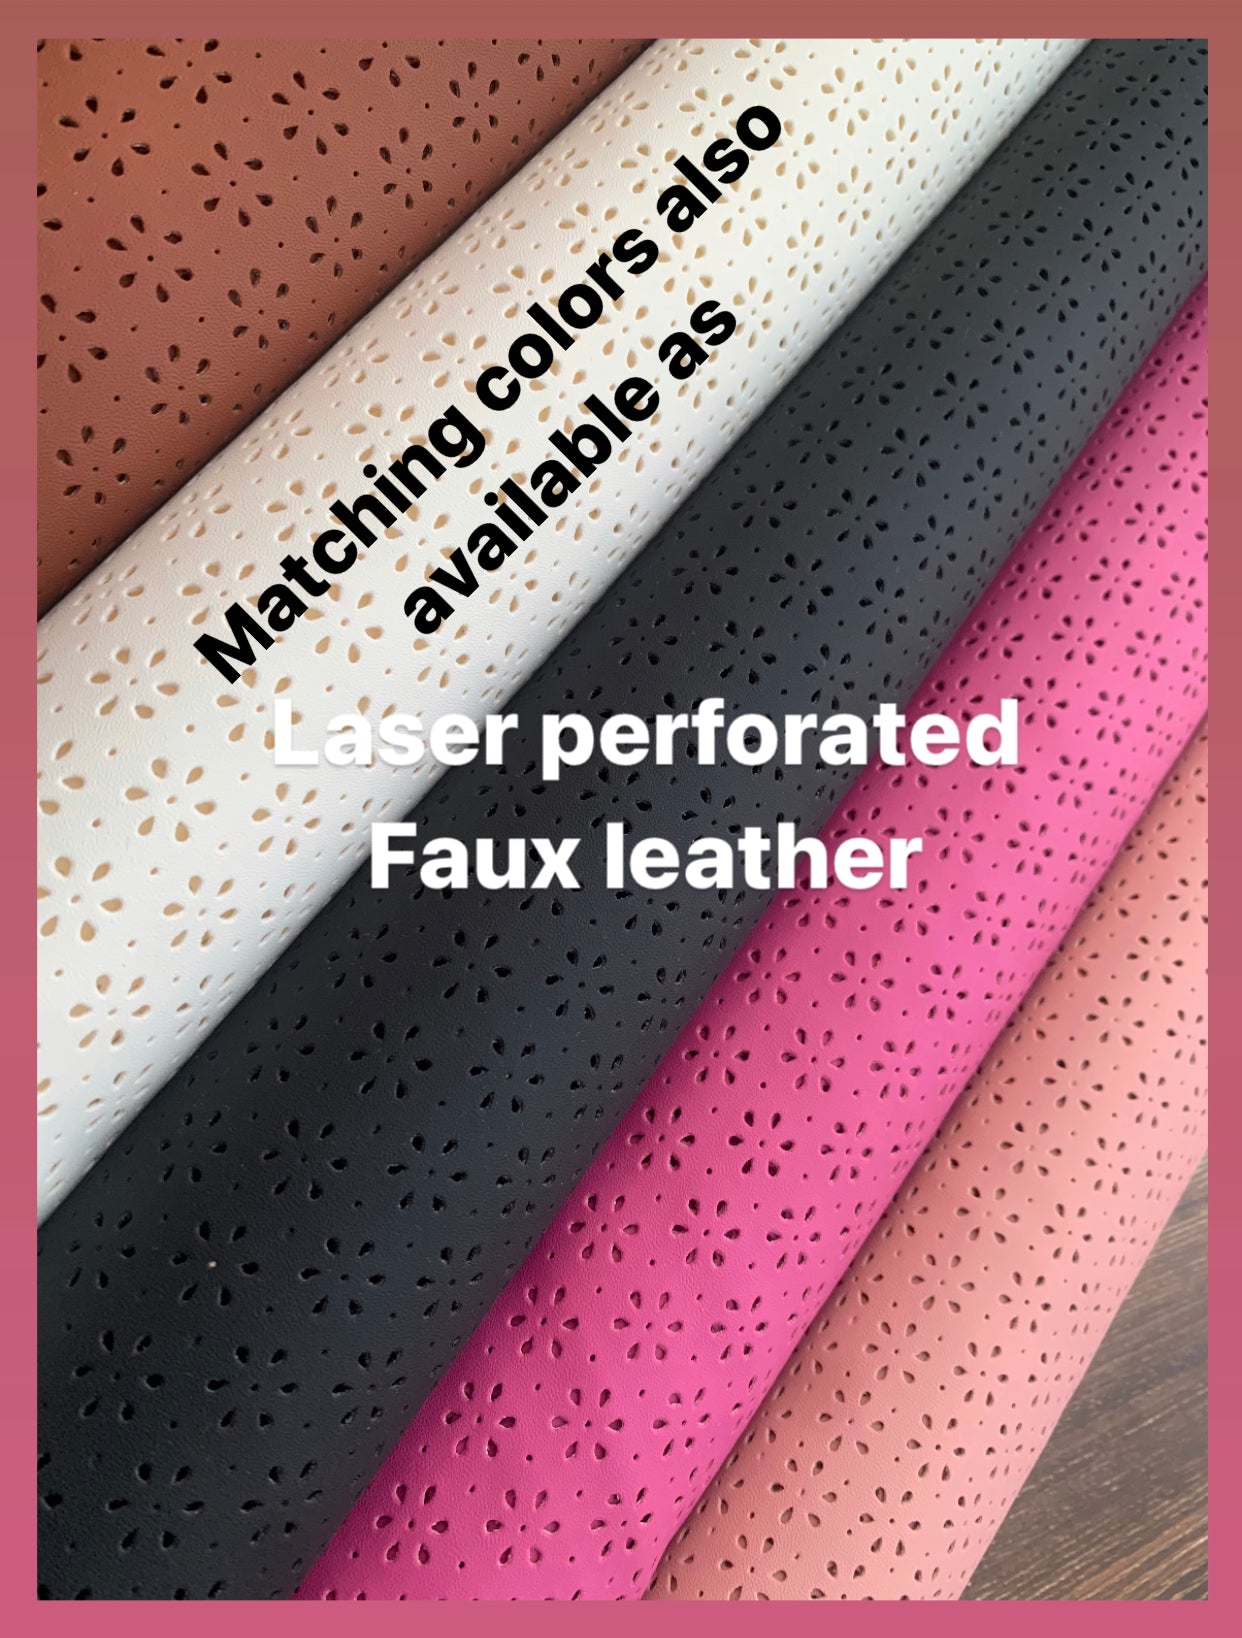 Smooth & Soft vinyl, sold faux leather, vegan leather, synthetic leather for bag making, shoes, garments, home decor etc.